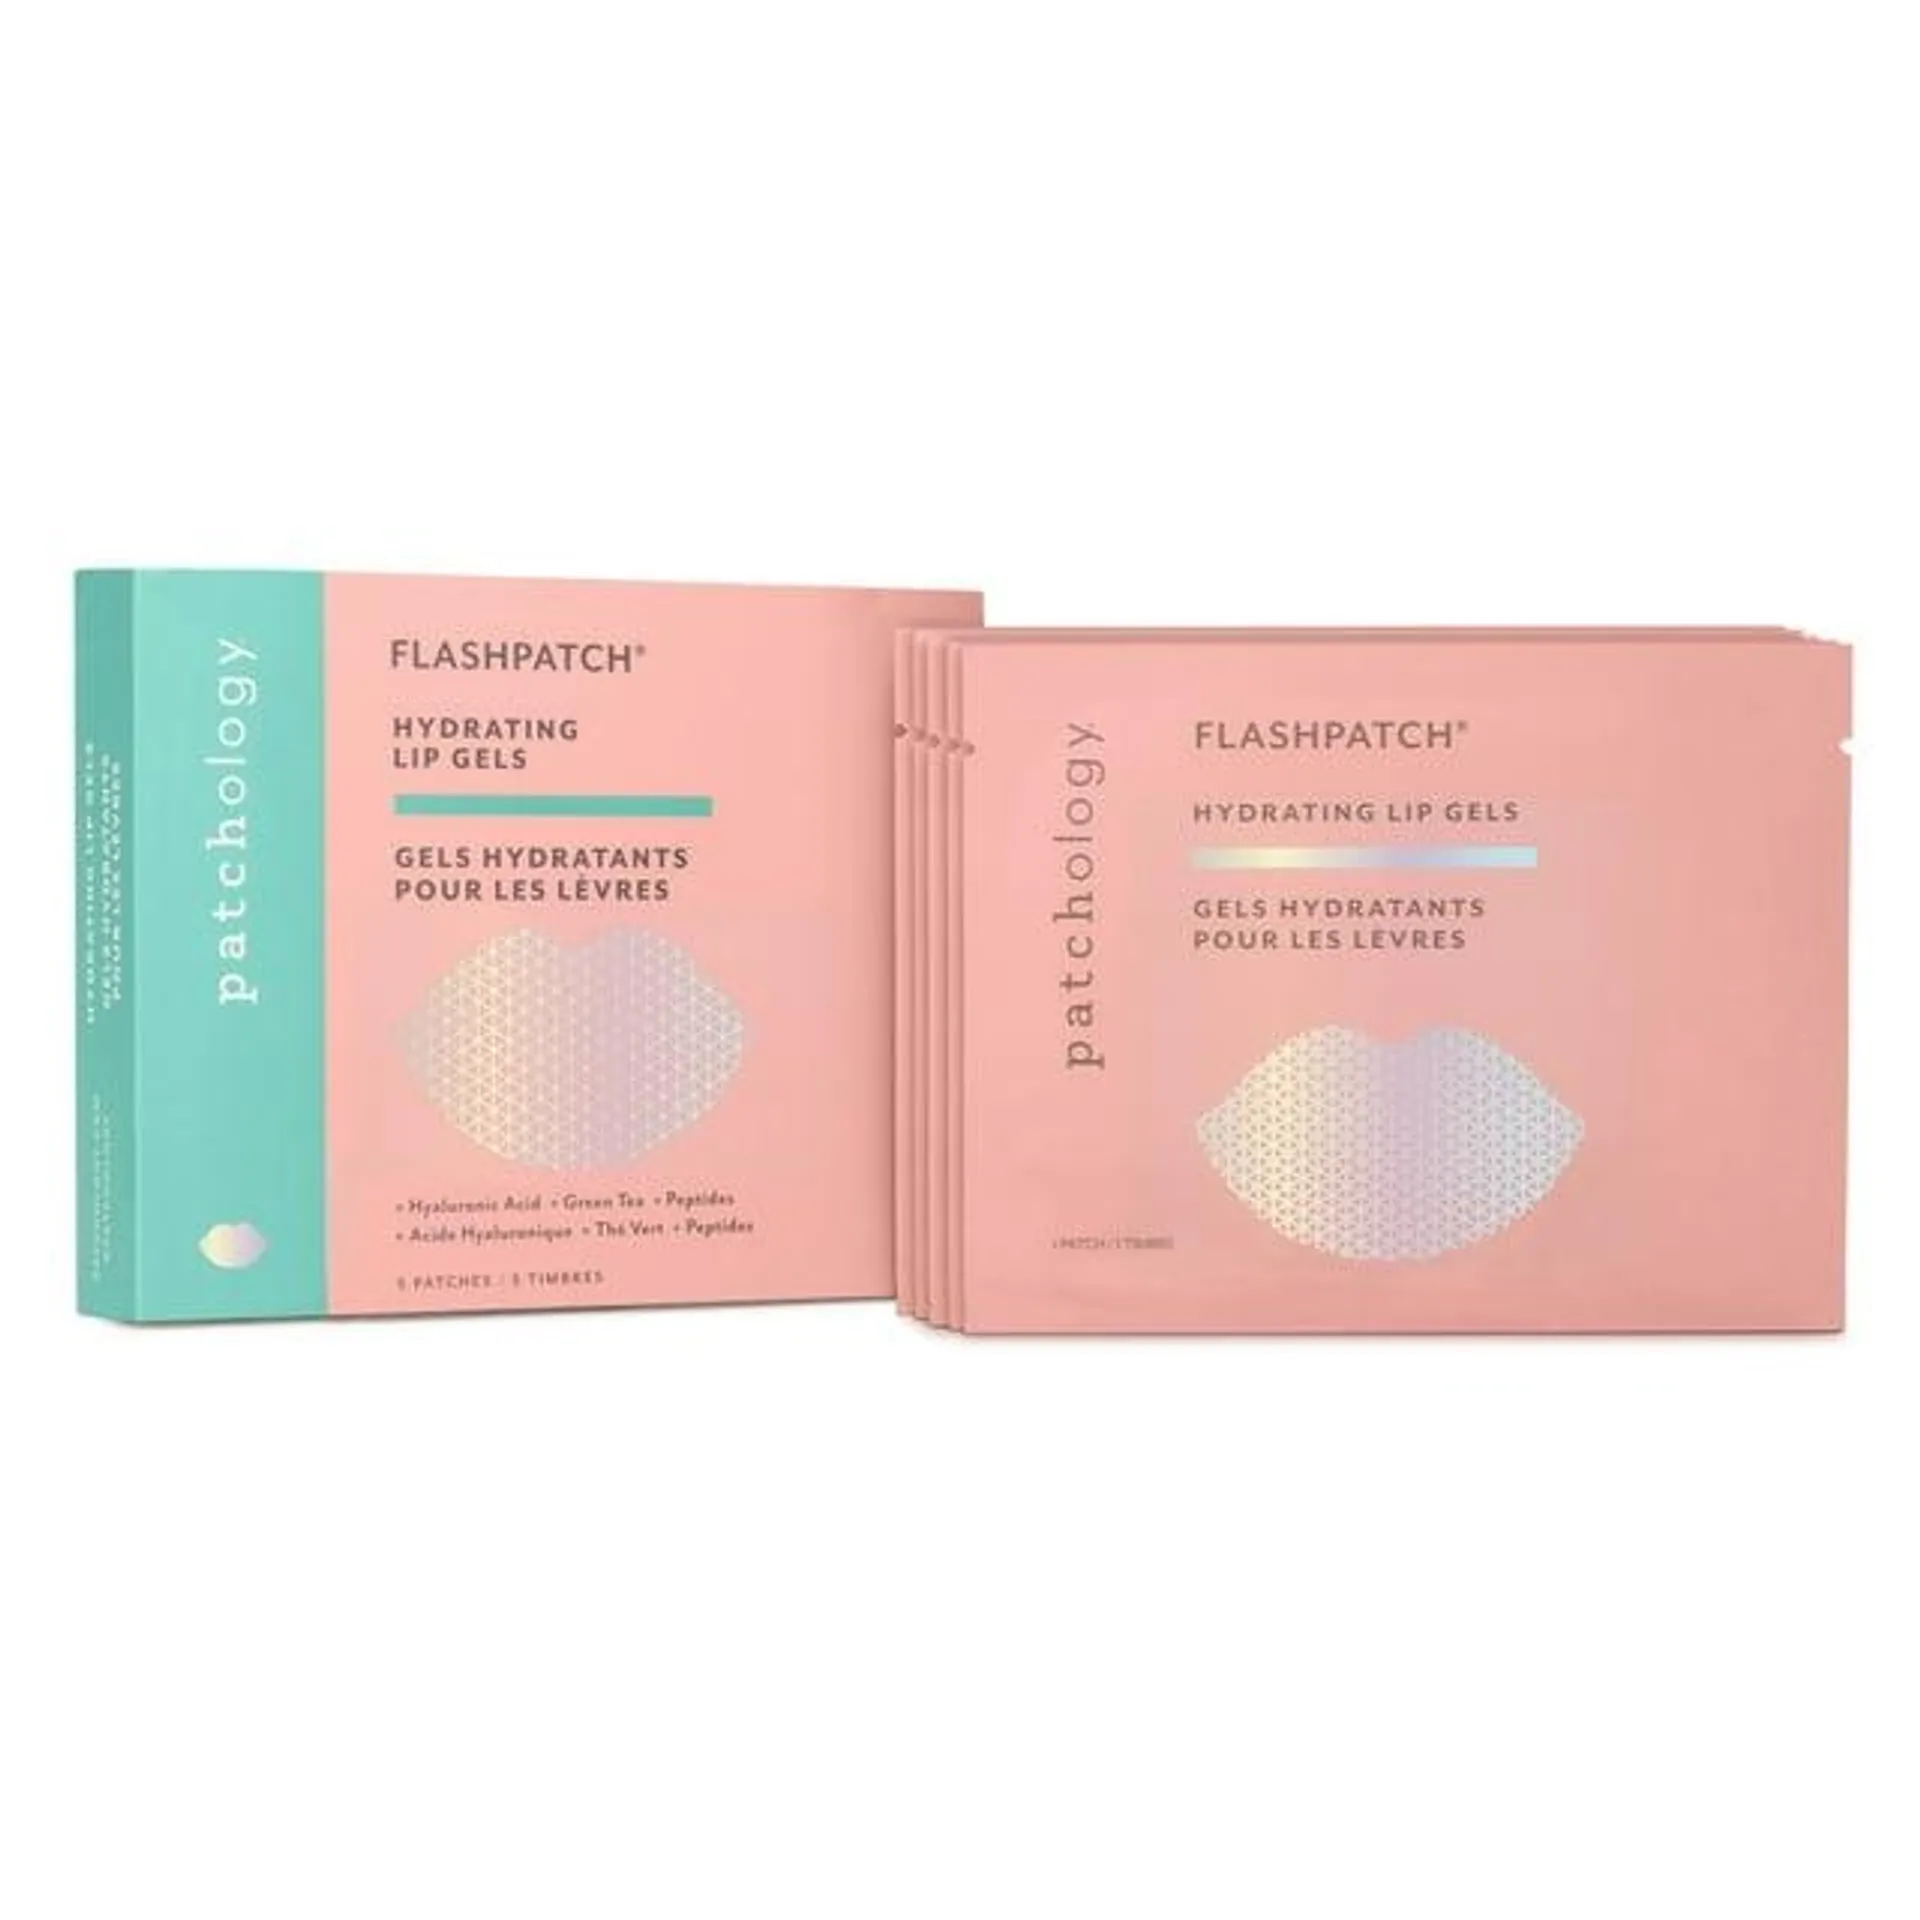 Patchology Hydrating Lip Mask Beauty Treatment Gels - 5 Pairs